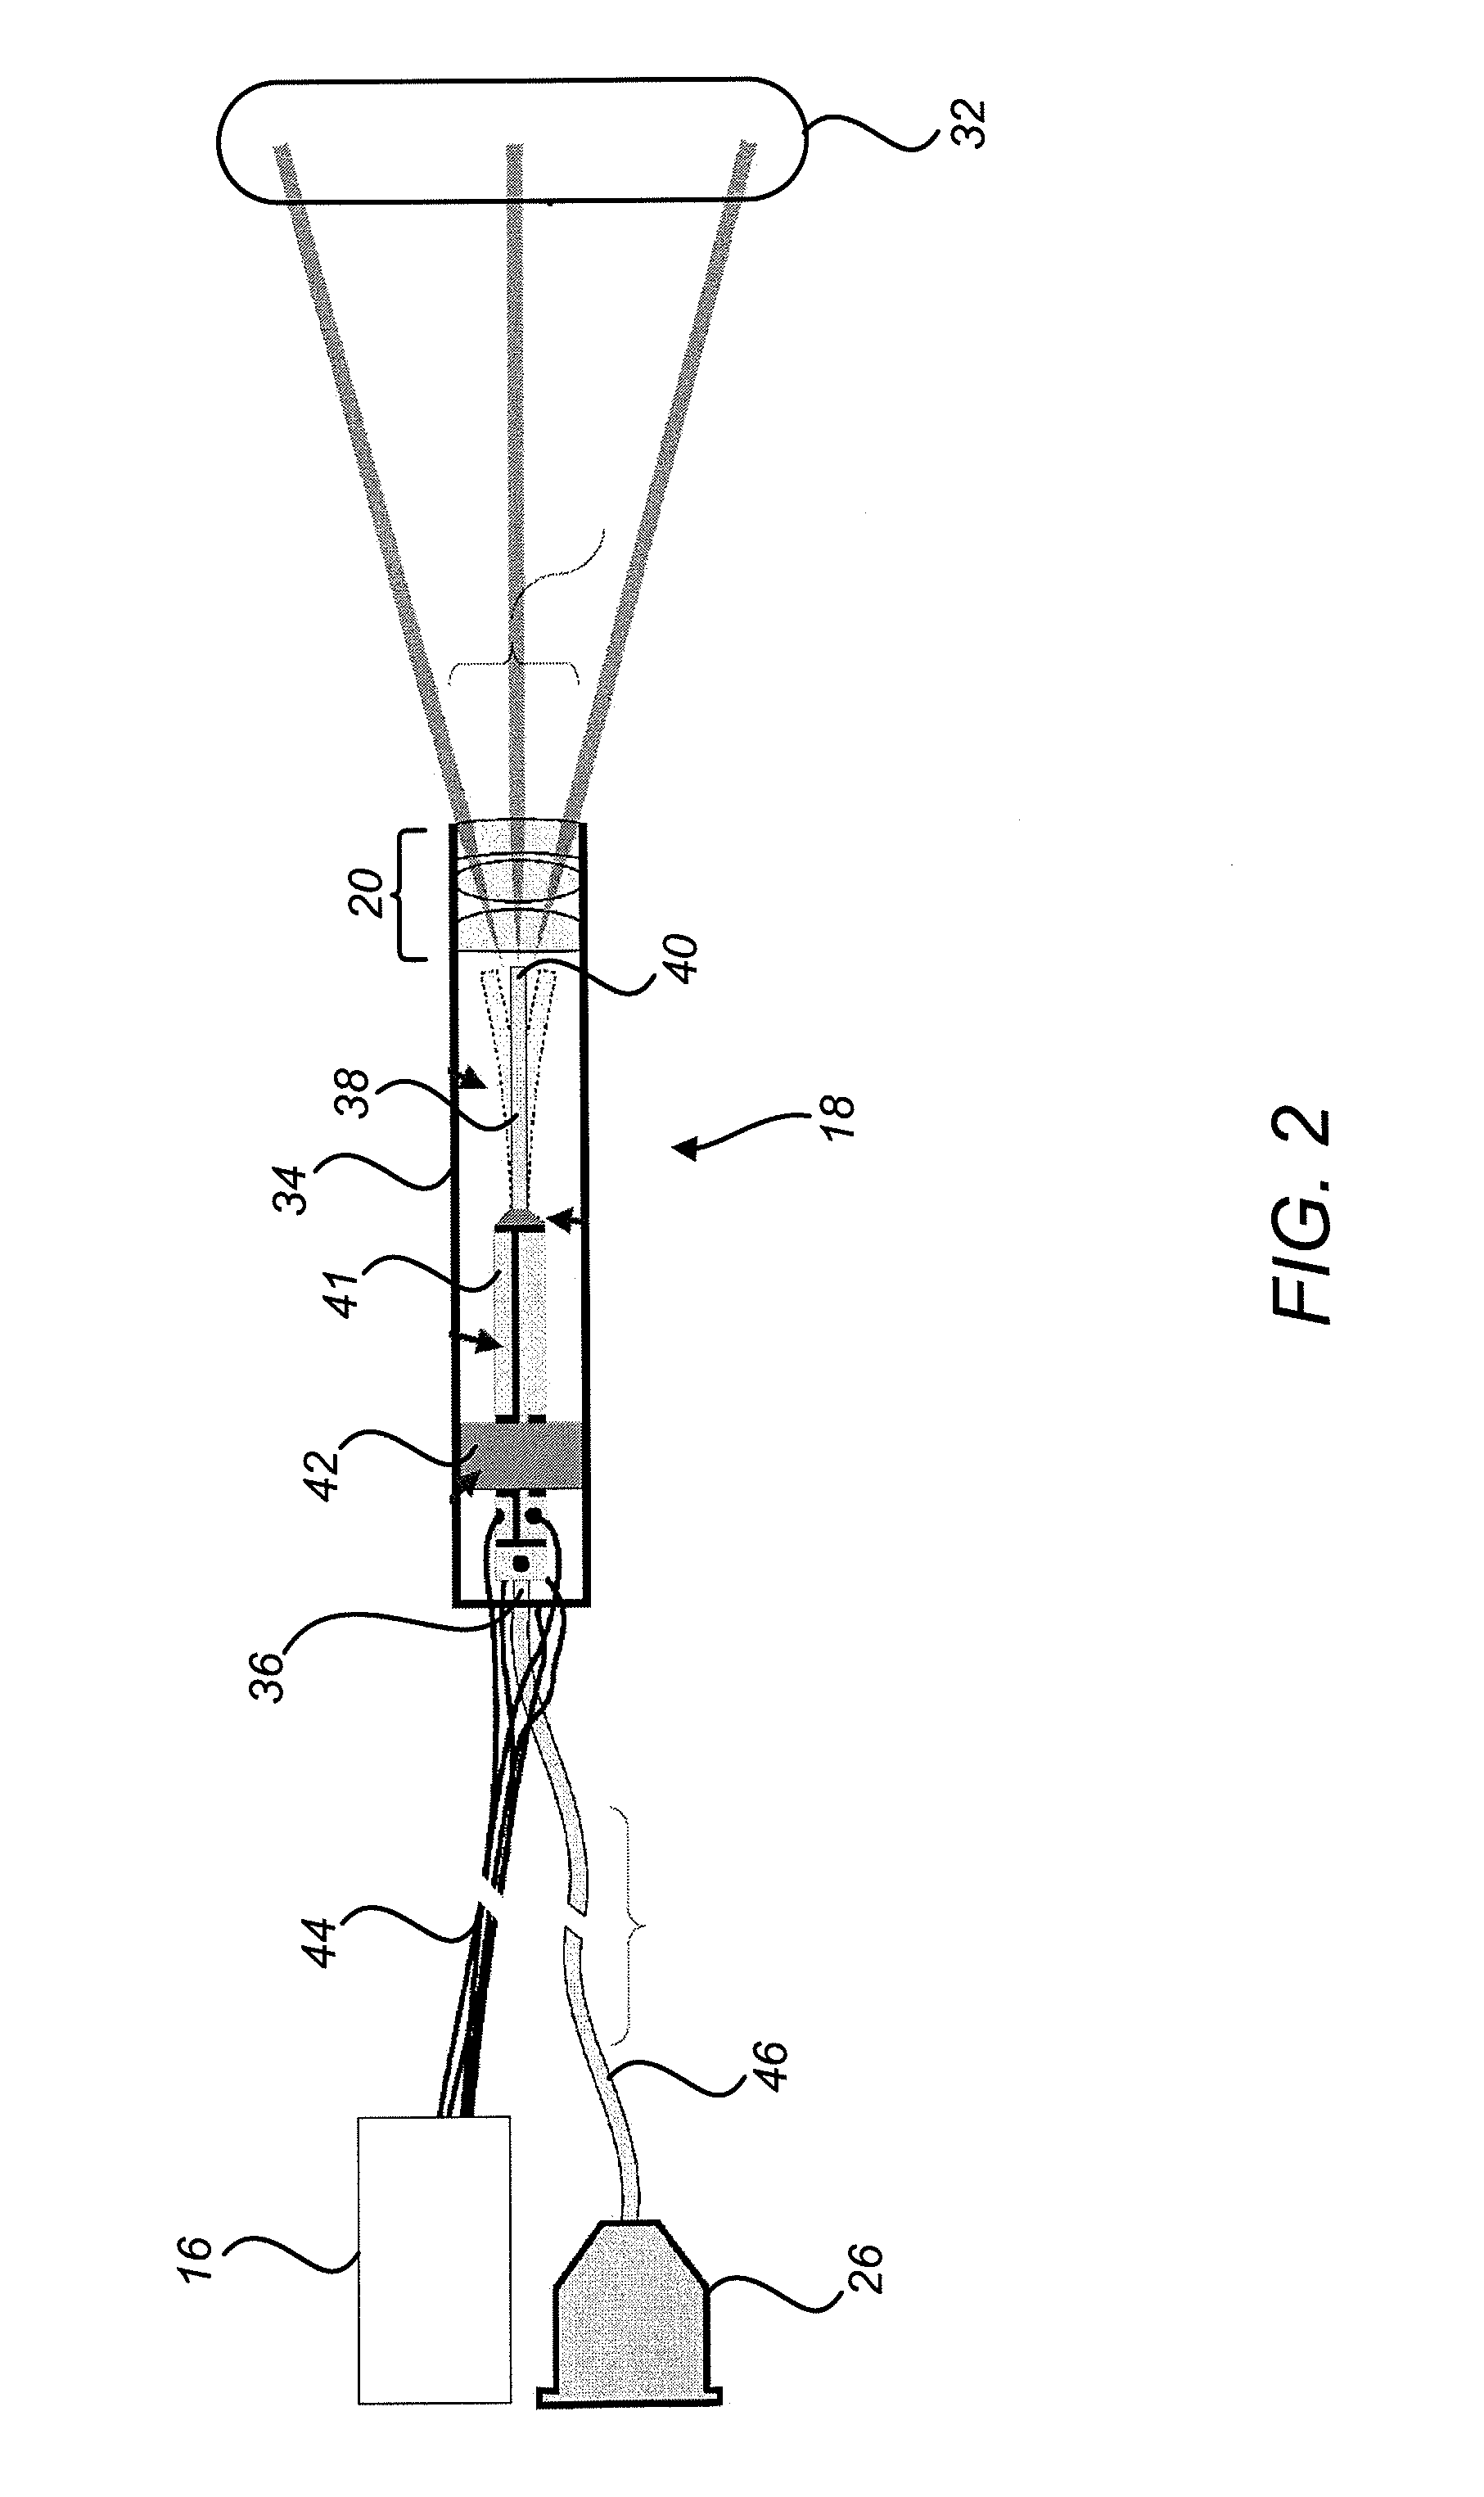 Scanning laser projection display devices and methods for projecting one or more images onto a surface with a light-scanning optical fiber